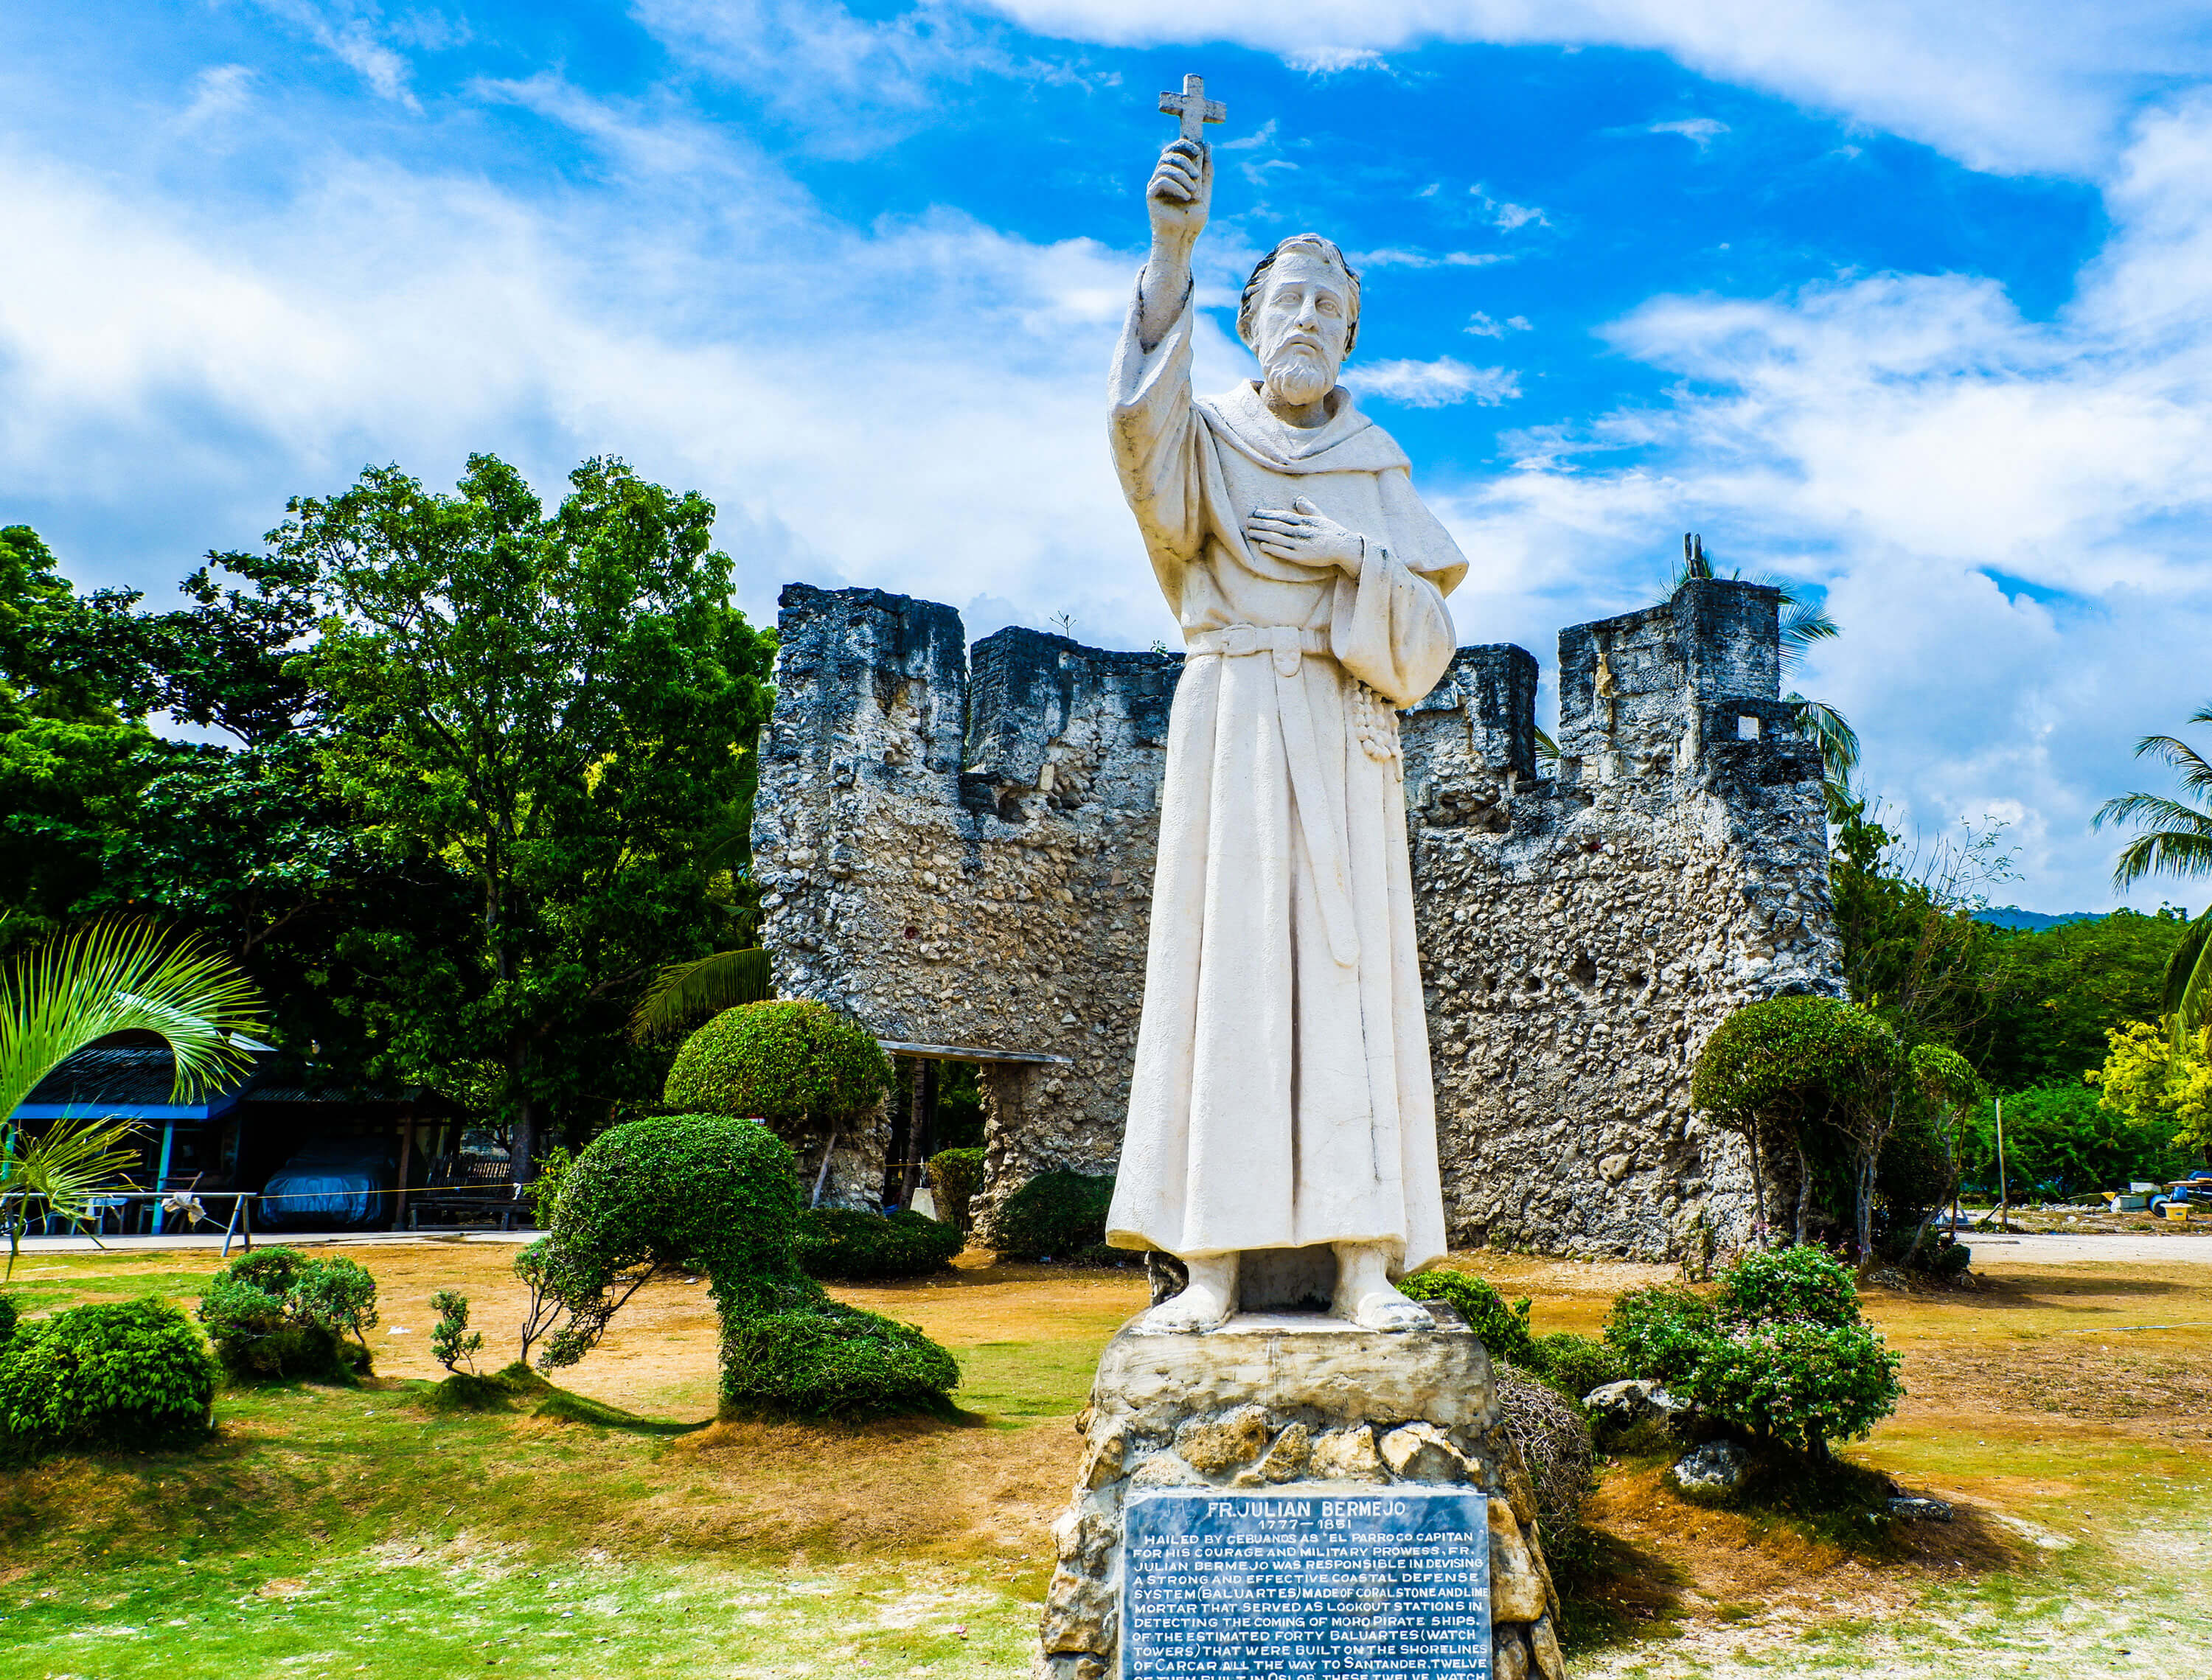 EL PADRE CAPITAN. The statue of Fr. Julian Bermejo OSA in Oslob stands in front of the ruins of the baluarte – the watchtower part of a network that he organized to protect southern Cebu towns from Moro raiders.